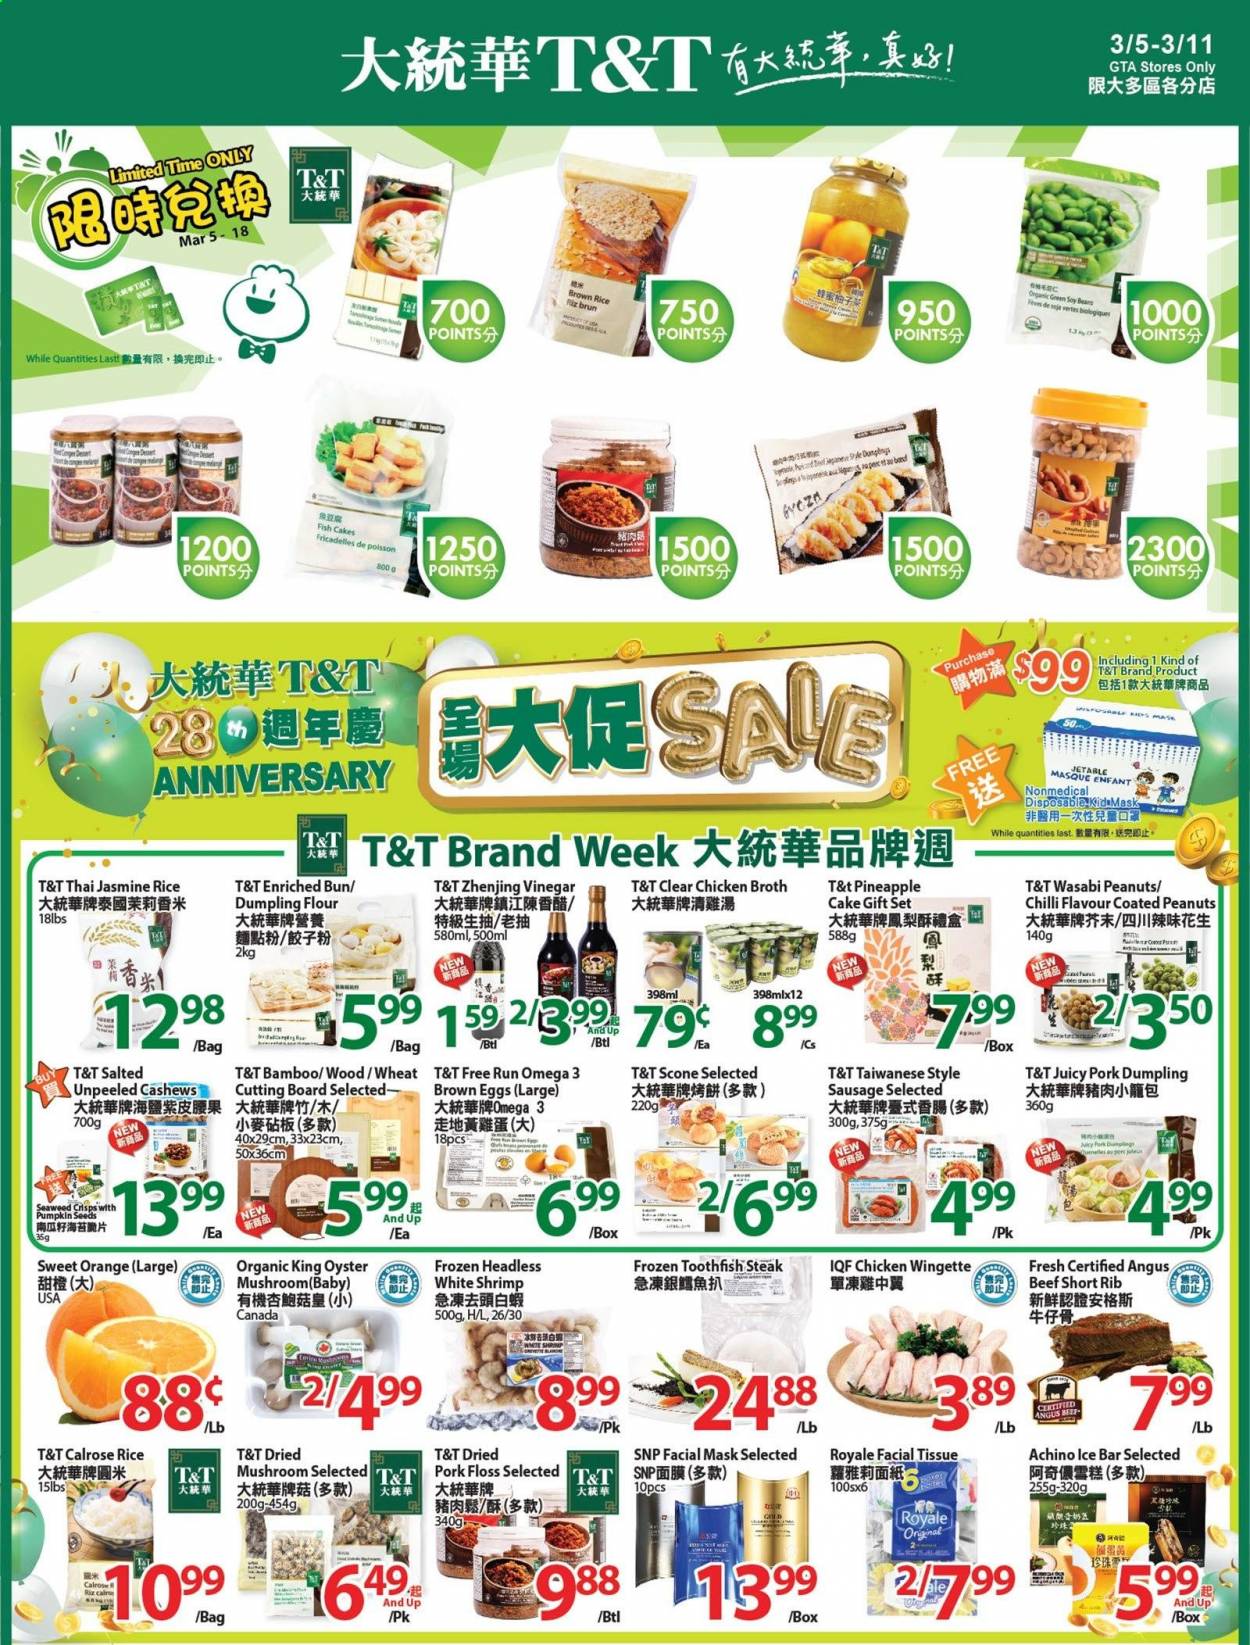 thumbnail - T&T Supermarket Flyer - March 05, 2021 - March 11, 2021 - Sales products - oyster mushrooms, mushrooms, pineapple tart, beans, oysters, fish, shrimps, dumplings, sausage, eggs, fish cake, flour, chicken broth, seaweed, broth, brown rice, rice, soybeans, jasmine rice, vinegar, cashews, tissues, gift set, bag, cutting board, pin, Omega-3, wasabi, steak. Page 1.